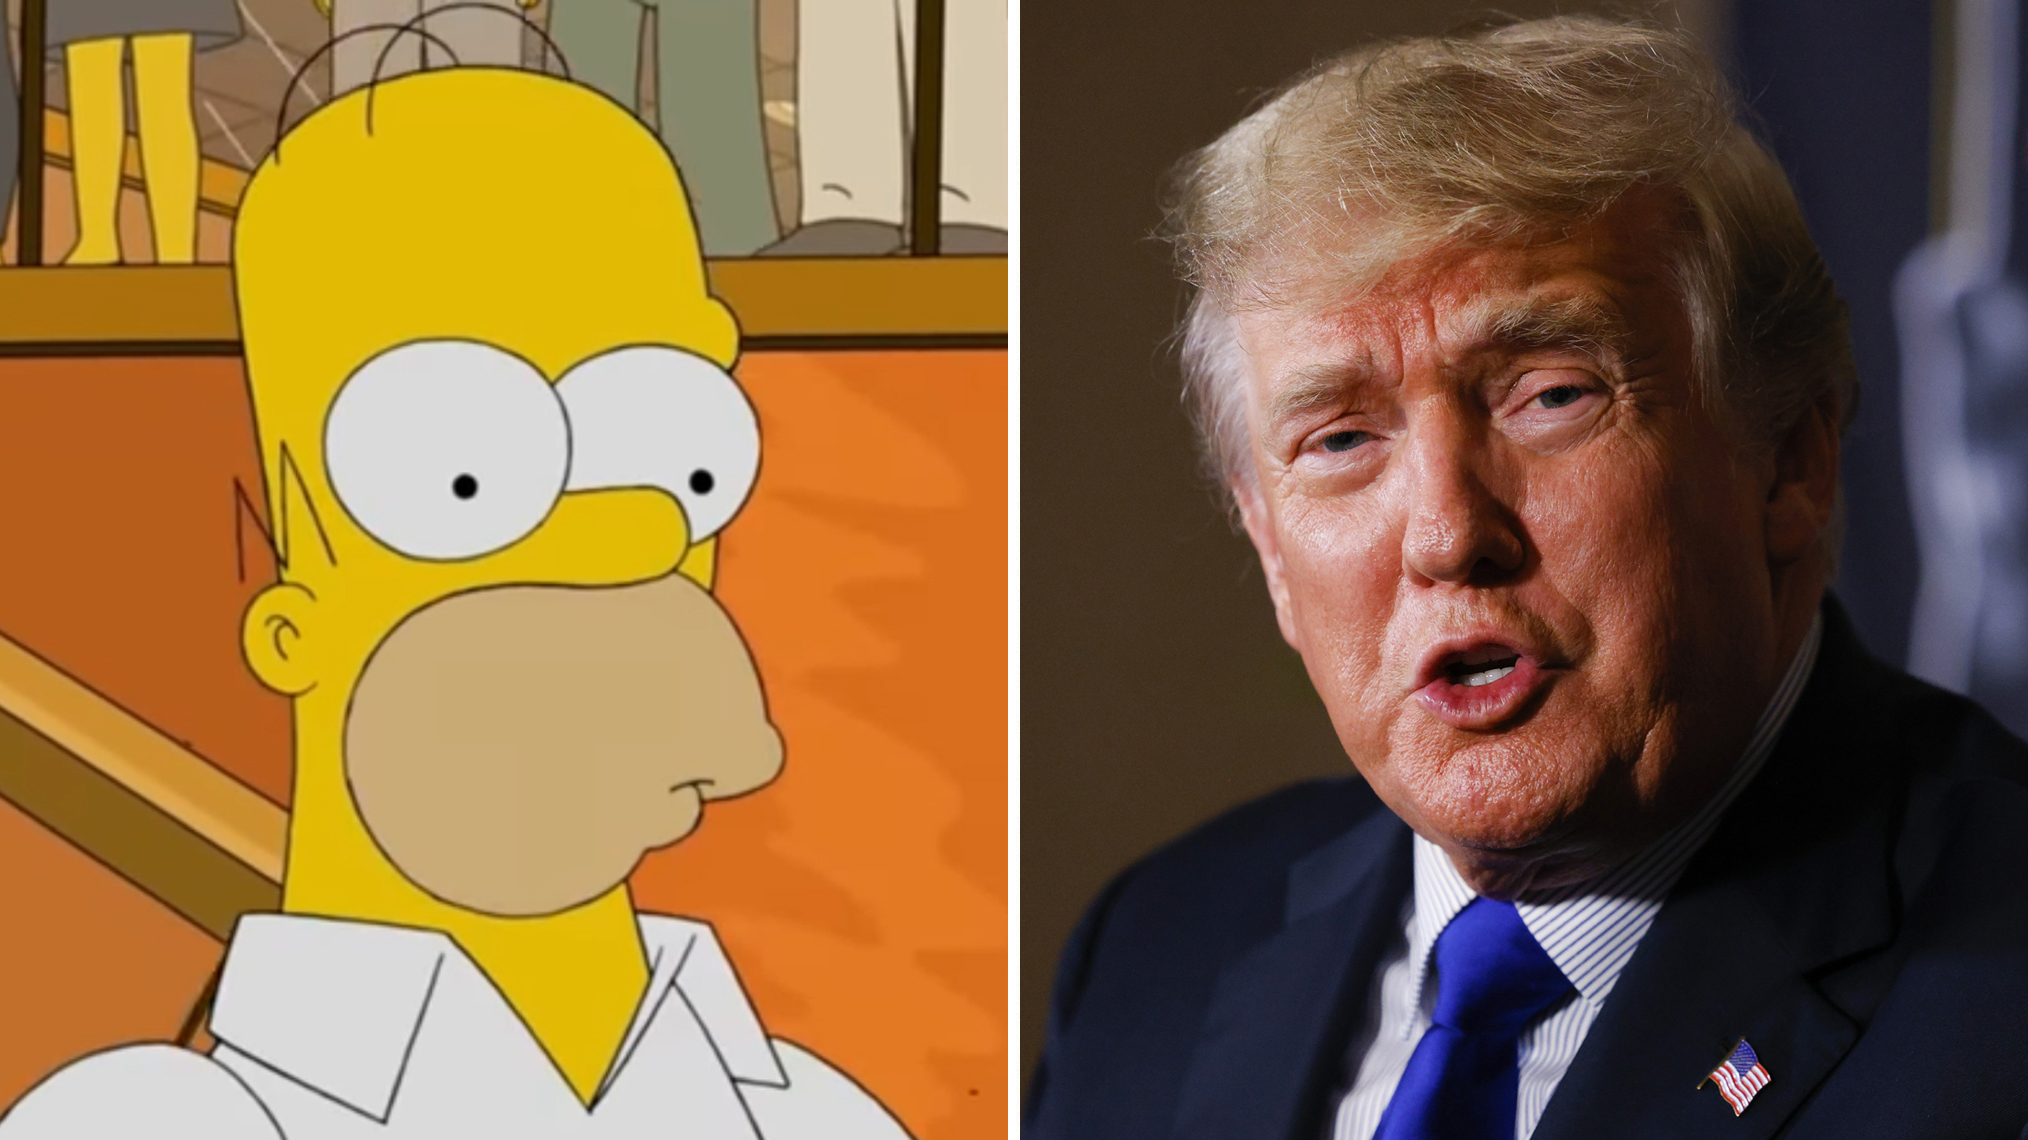 Trump 2024 Run Was Predicted by 'The Simpsons' in 2015